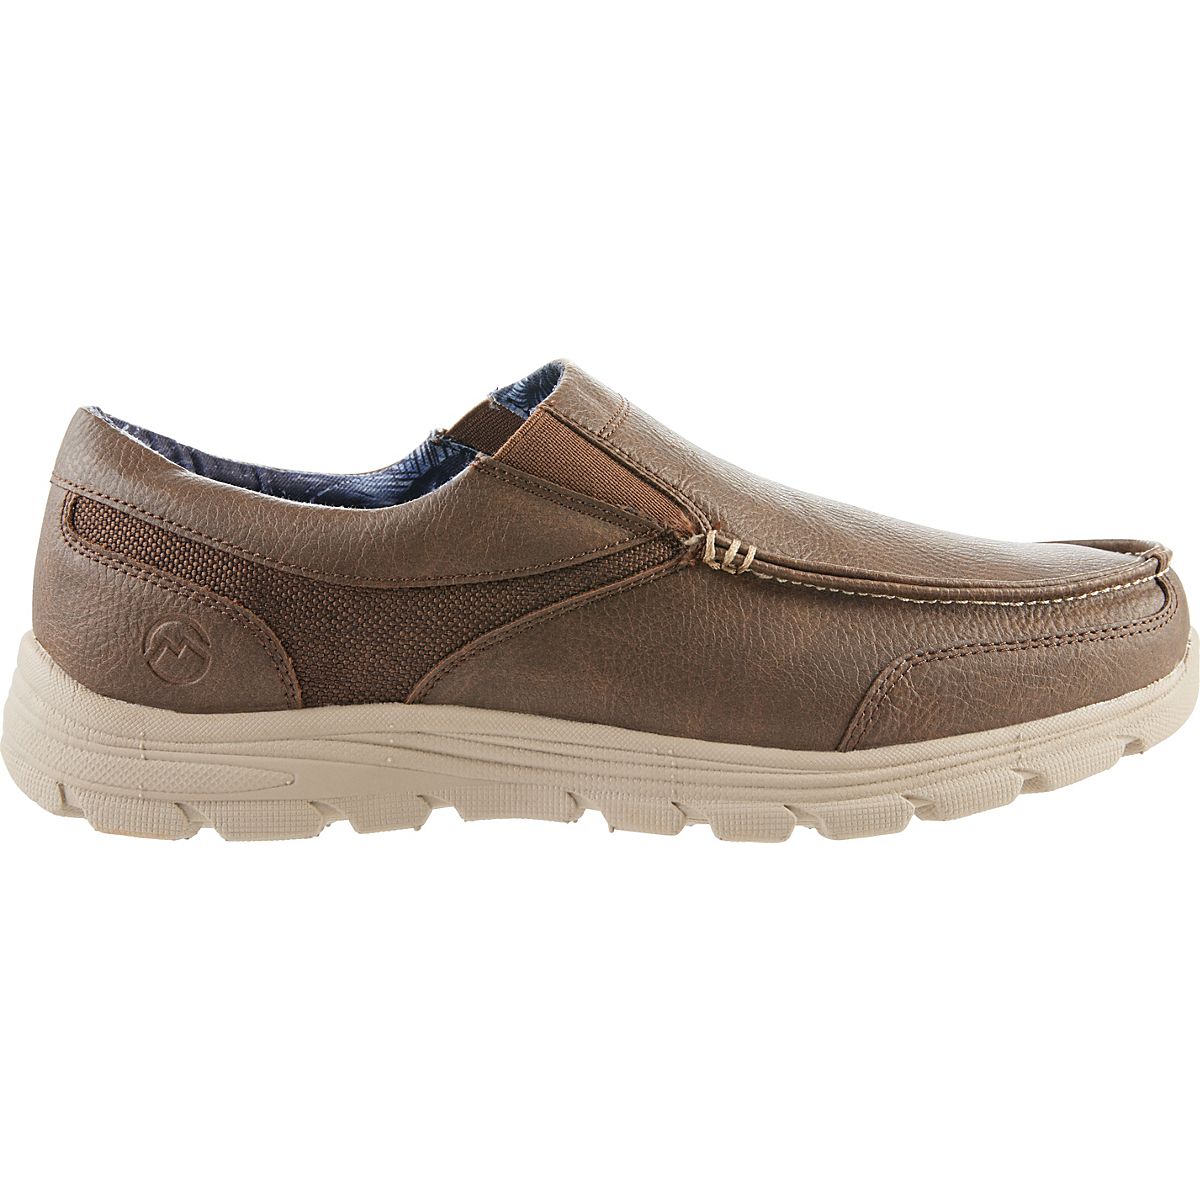 Magellan Outdoors Men's Clive Shoes | Free Shipping at Academy